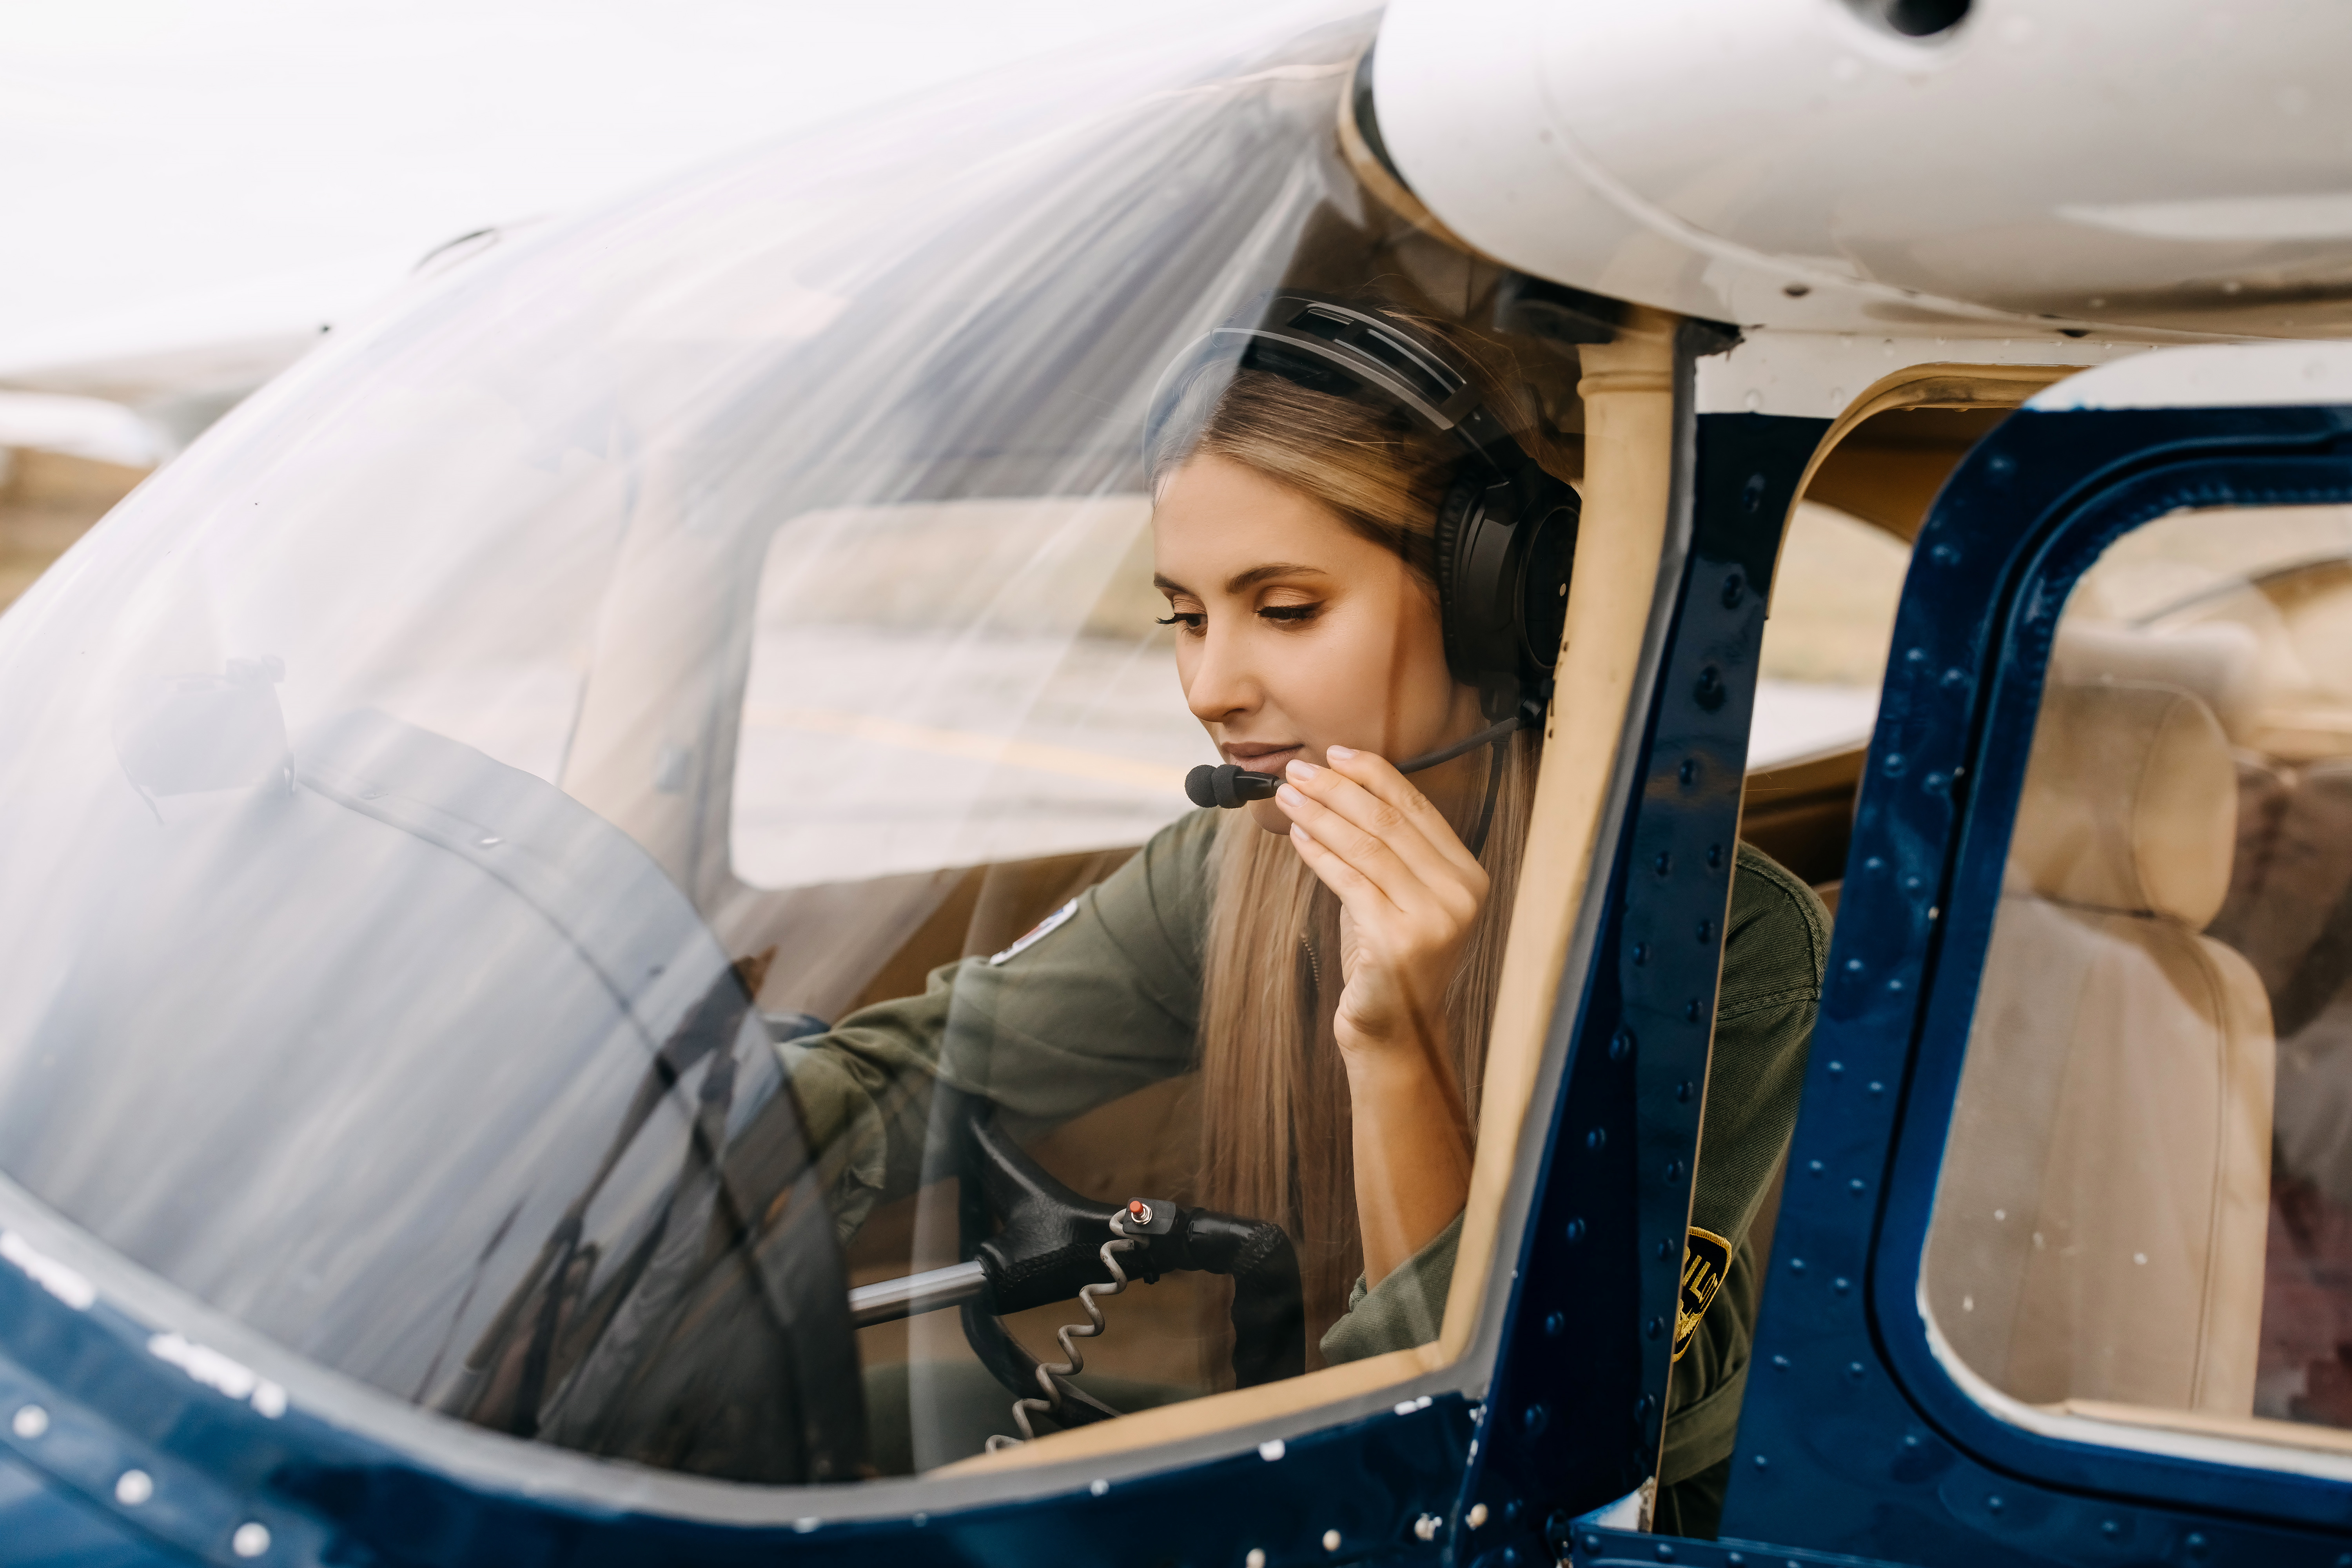 Flight Instructor sitting in an airplane